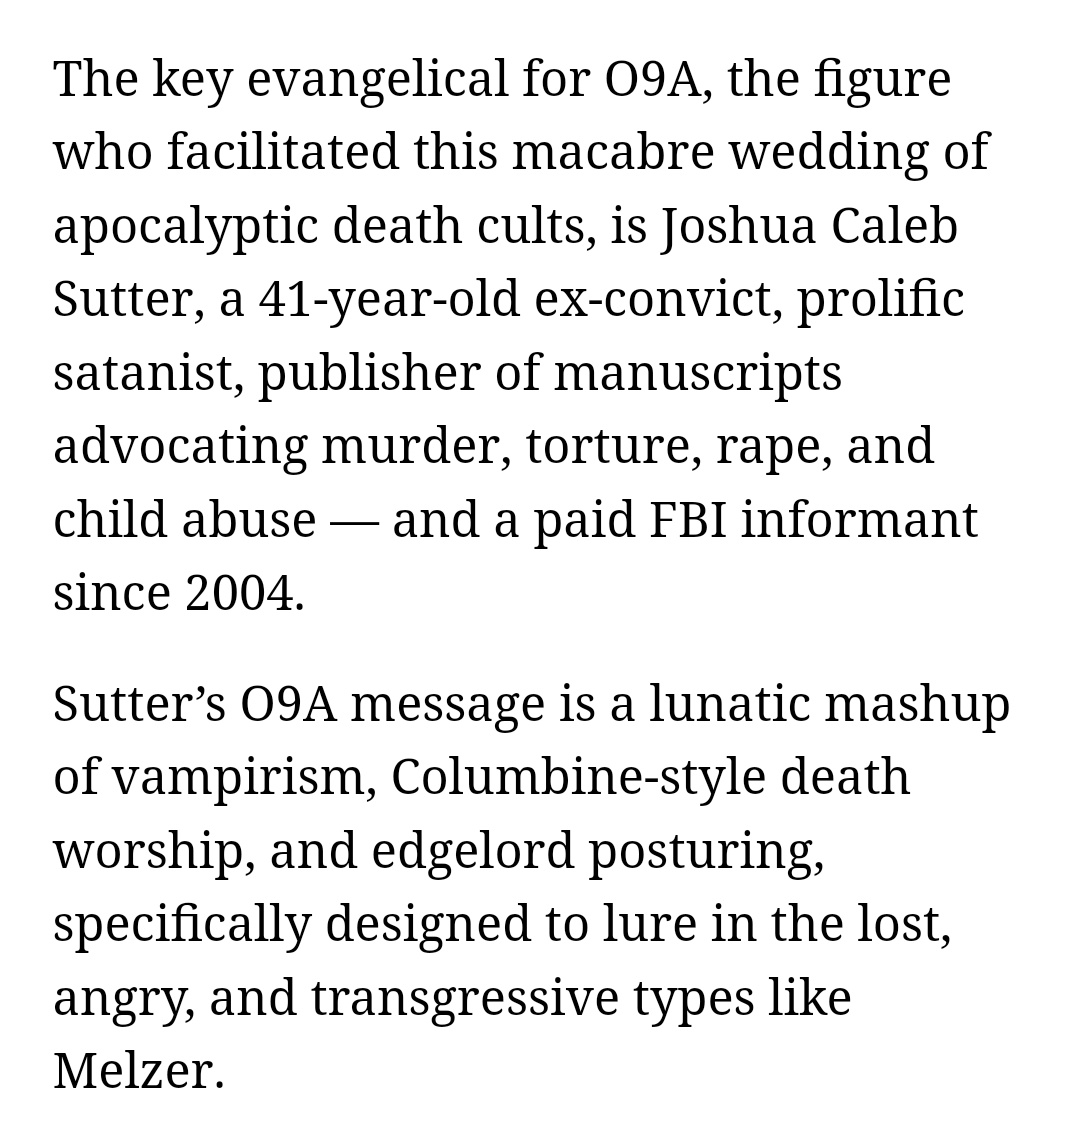 For close to 20 years, the FBI bankrolled one of the most extreme of satanic neo-Nazi publishing houses, which in turn radicalized thousands of people to the far-right online. https://www.rollingstone.com/culture/culture-features/the-satanist-neo-nazi-plot-to-murder-u-s-soldiers-1352629/